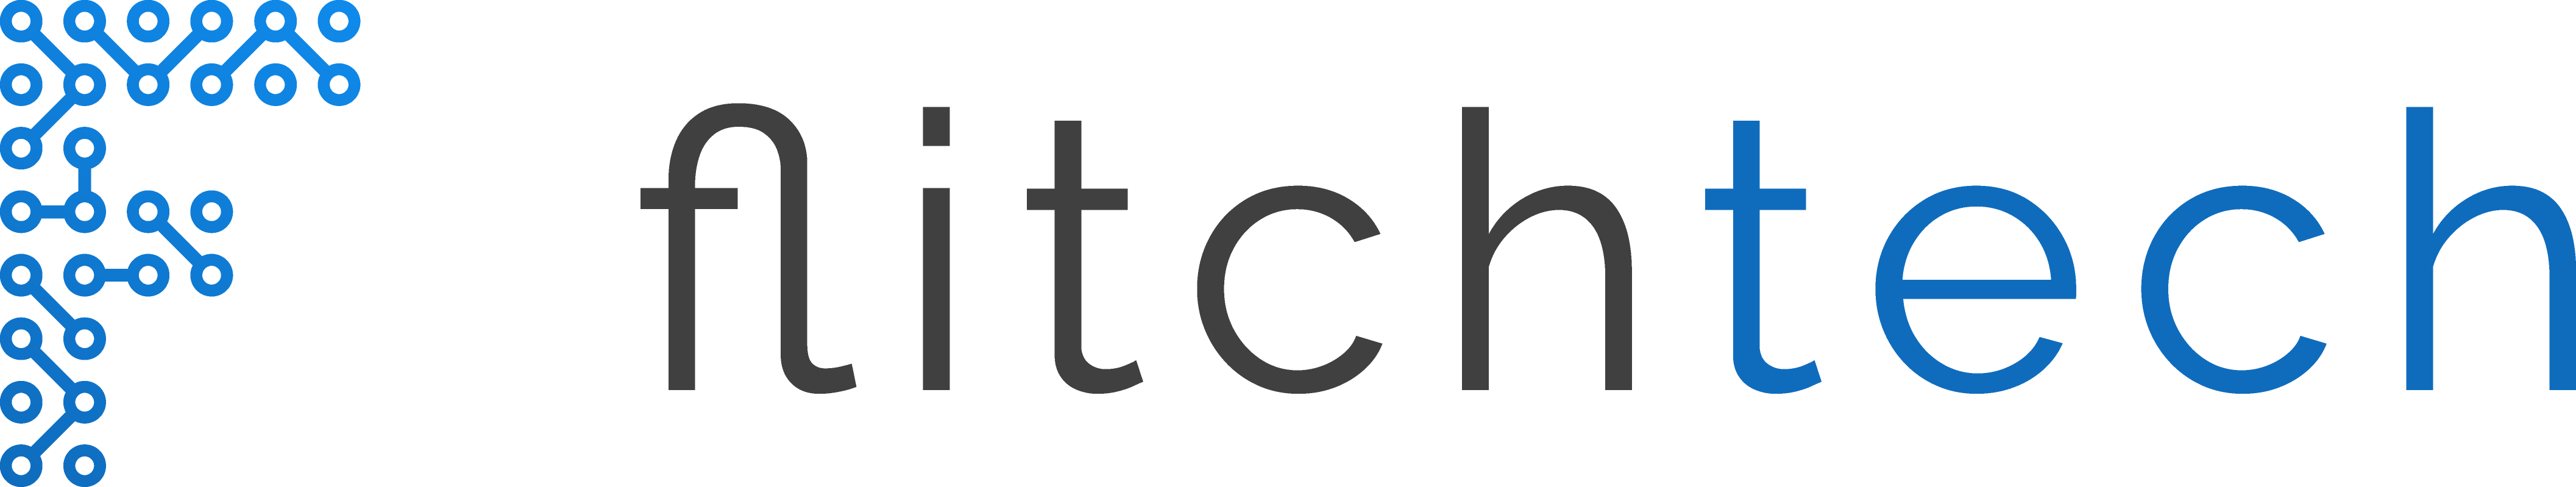 Flitch Technical Services